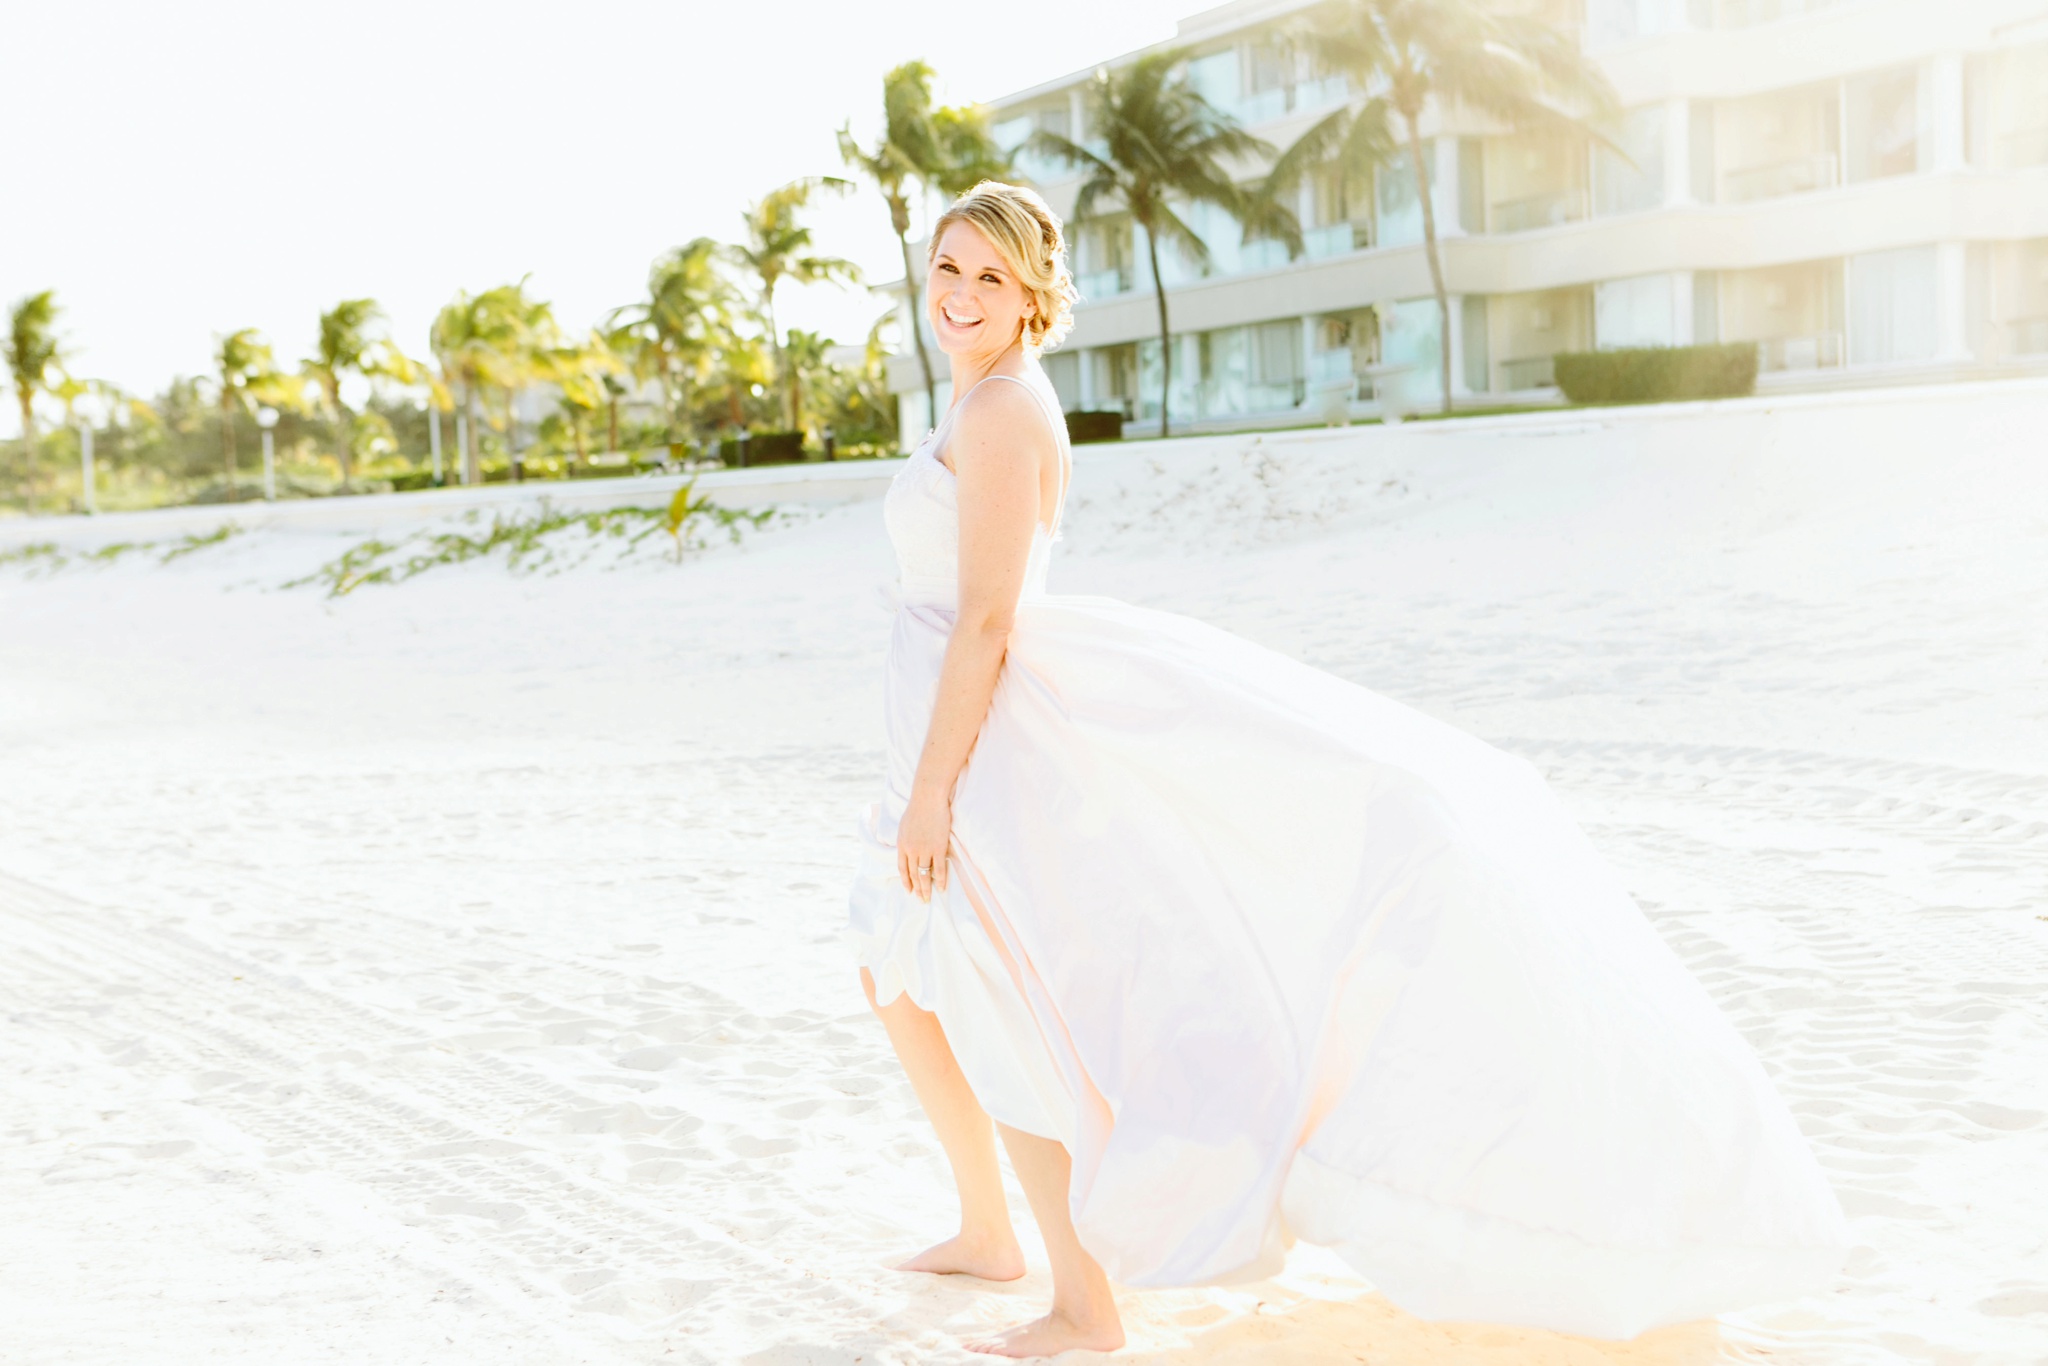 Moon Palace Resort Cancun Mexico Wedding Photos Bride Laughing on the Beach